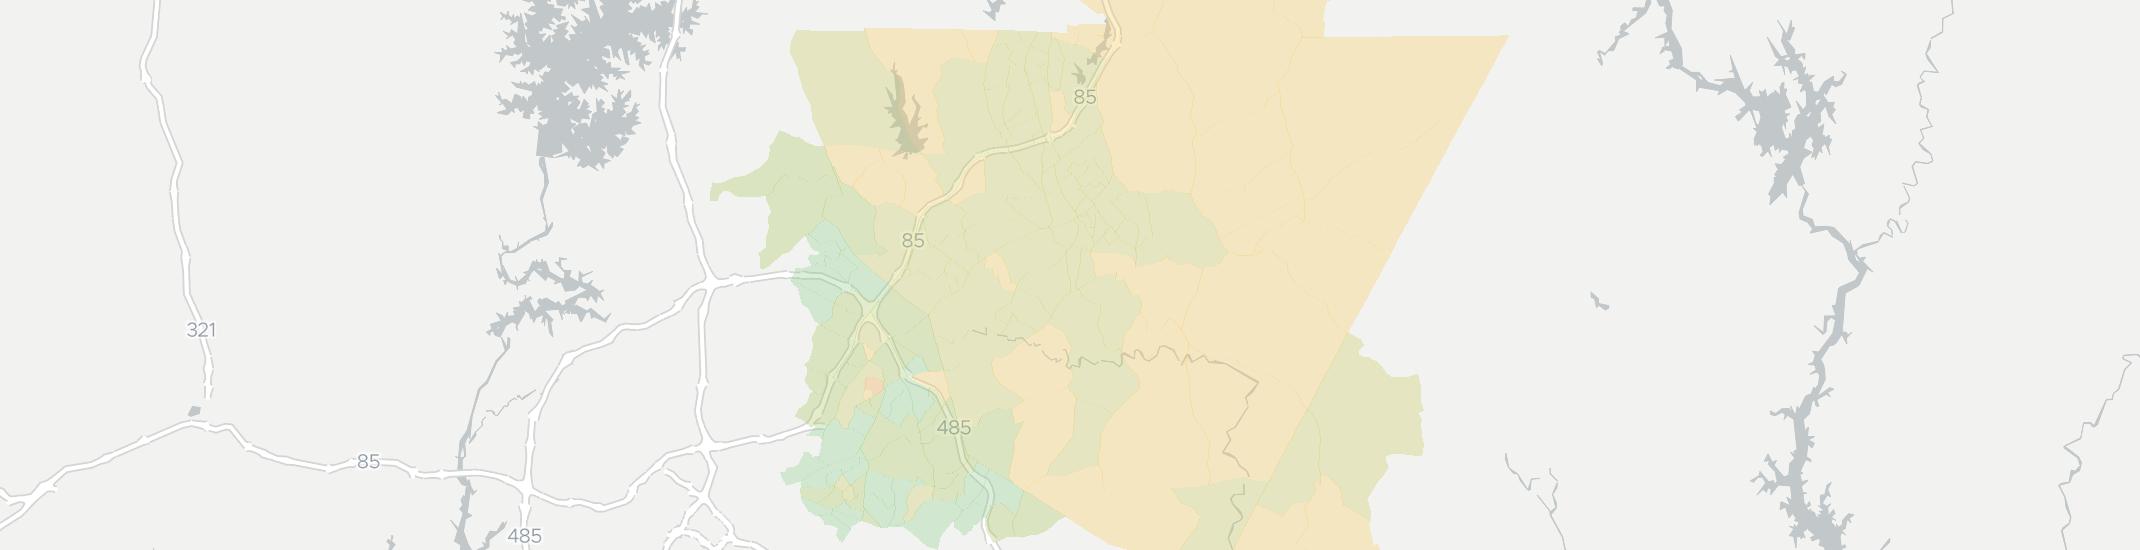 Concord Internet Competition Map. Click for interactive map